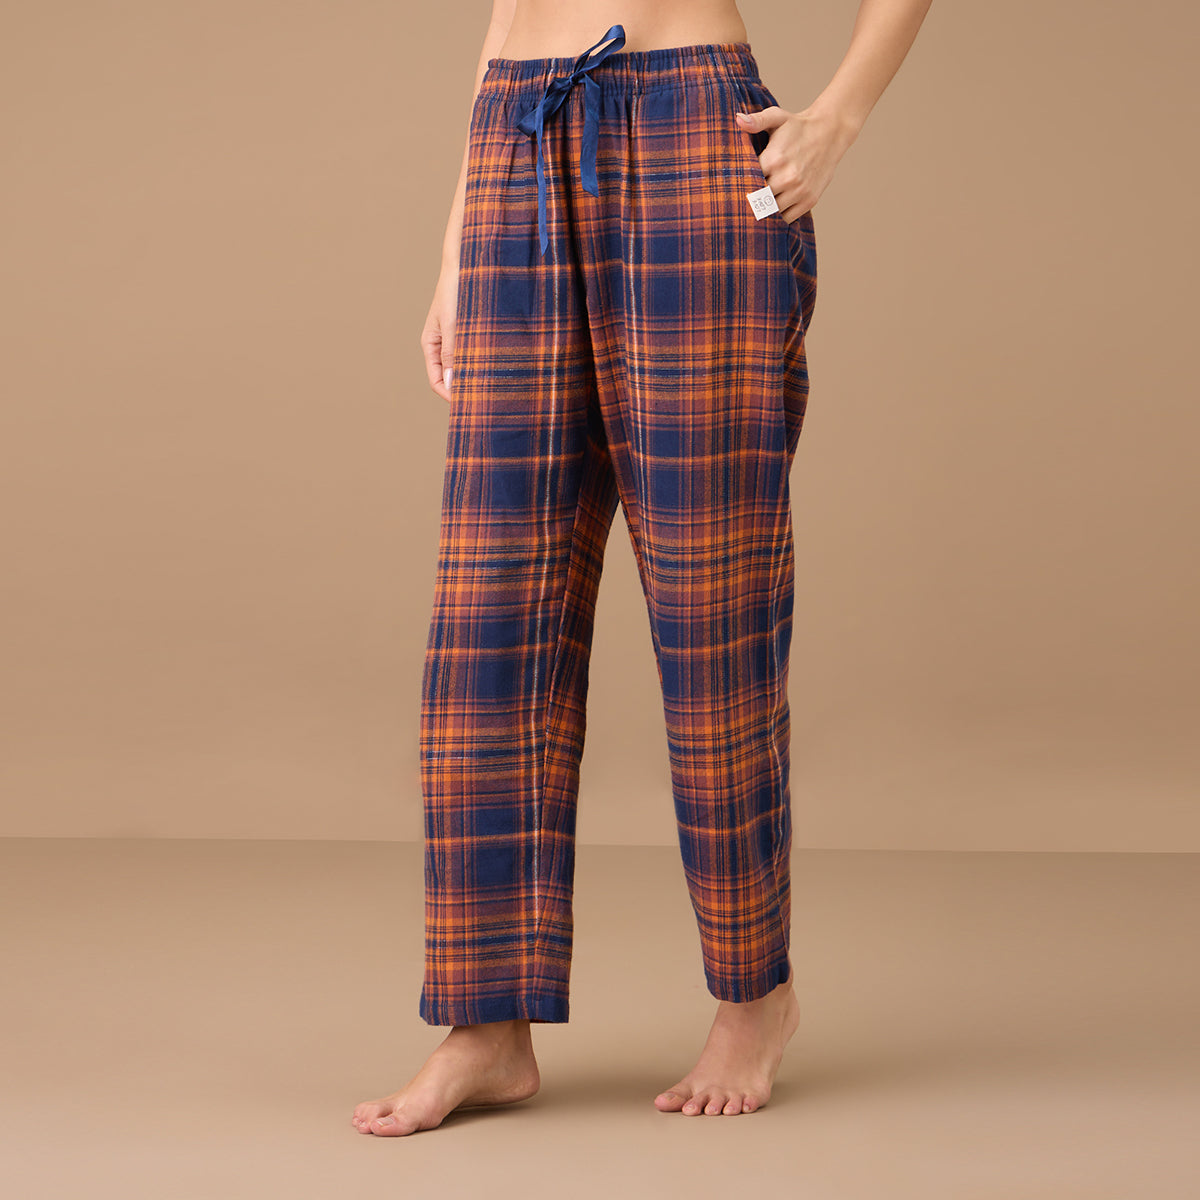 Nykd By Nykaa Cotton Flannel Pajama - NYS901 - Navy Brown Plaid